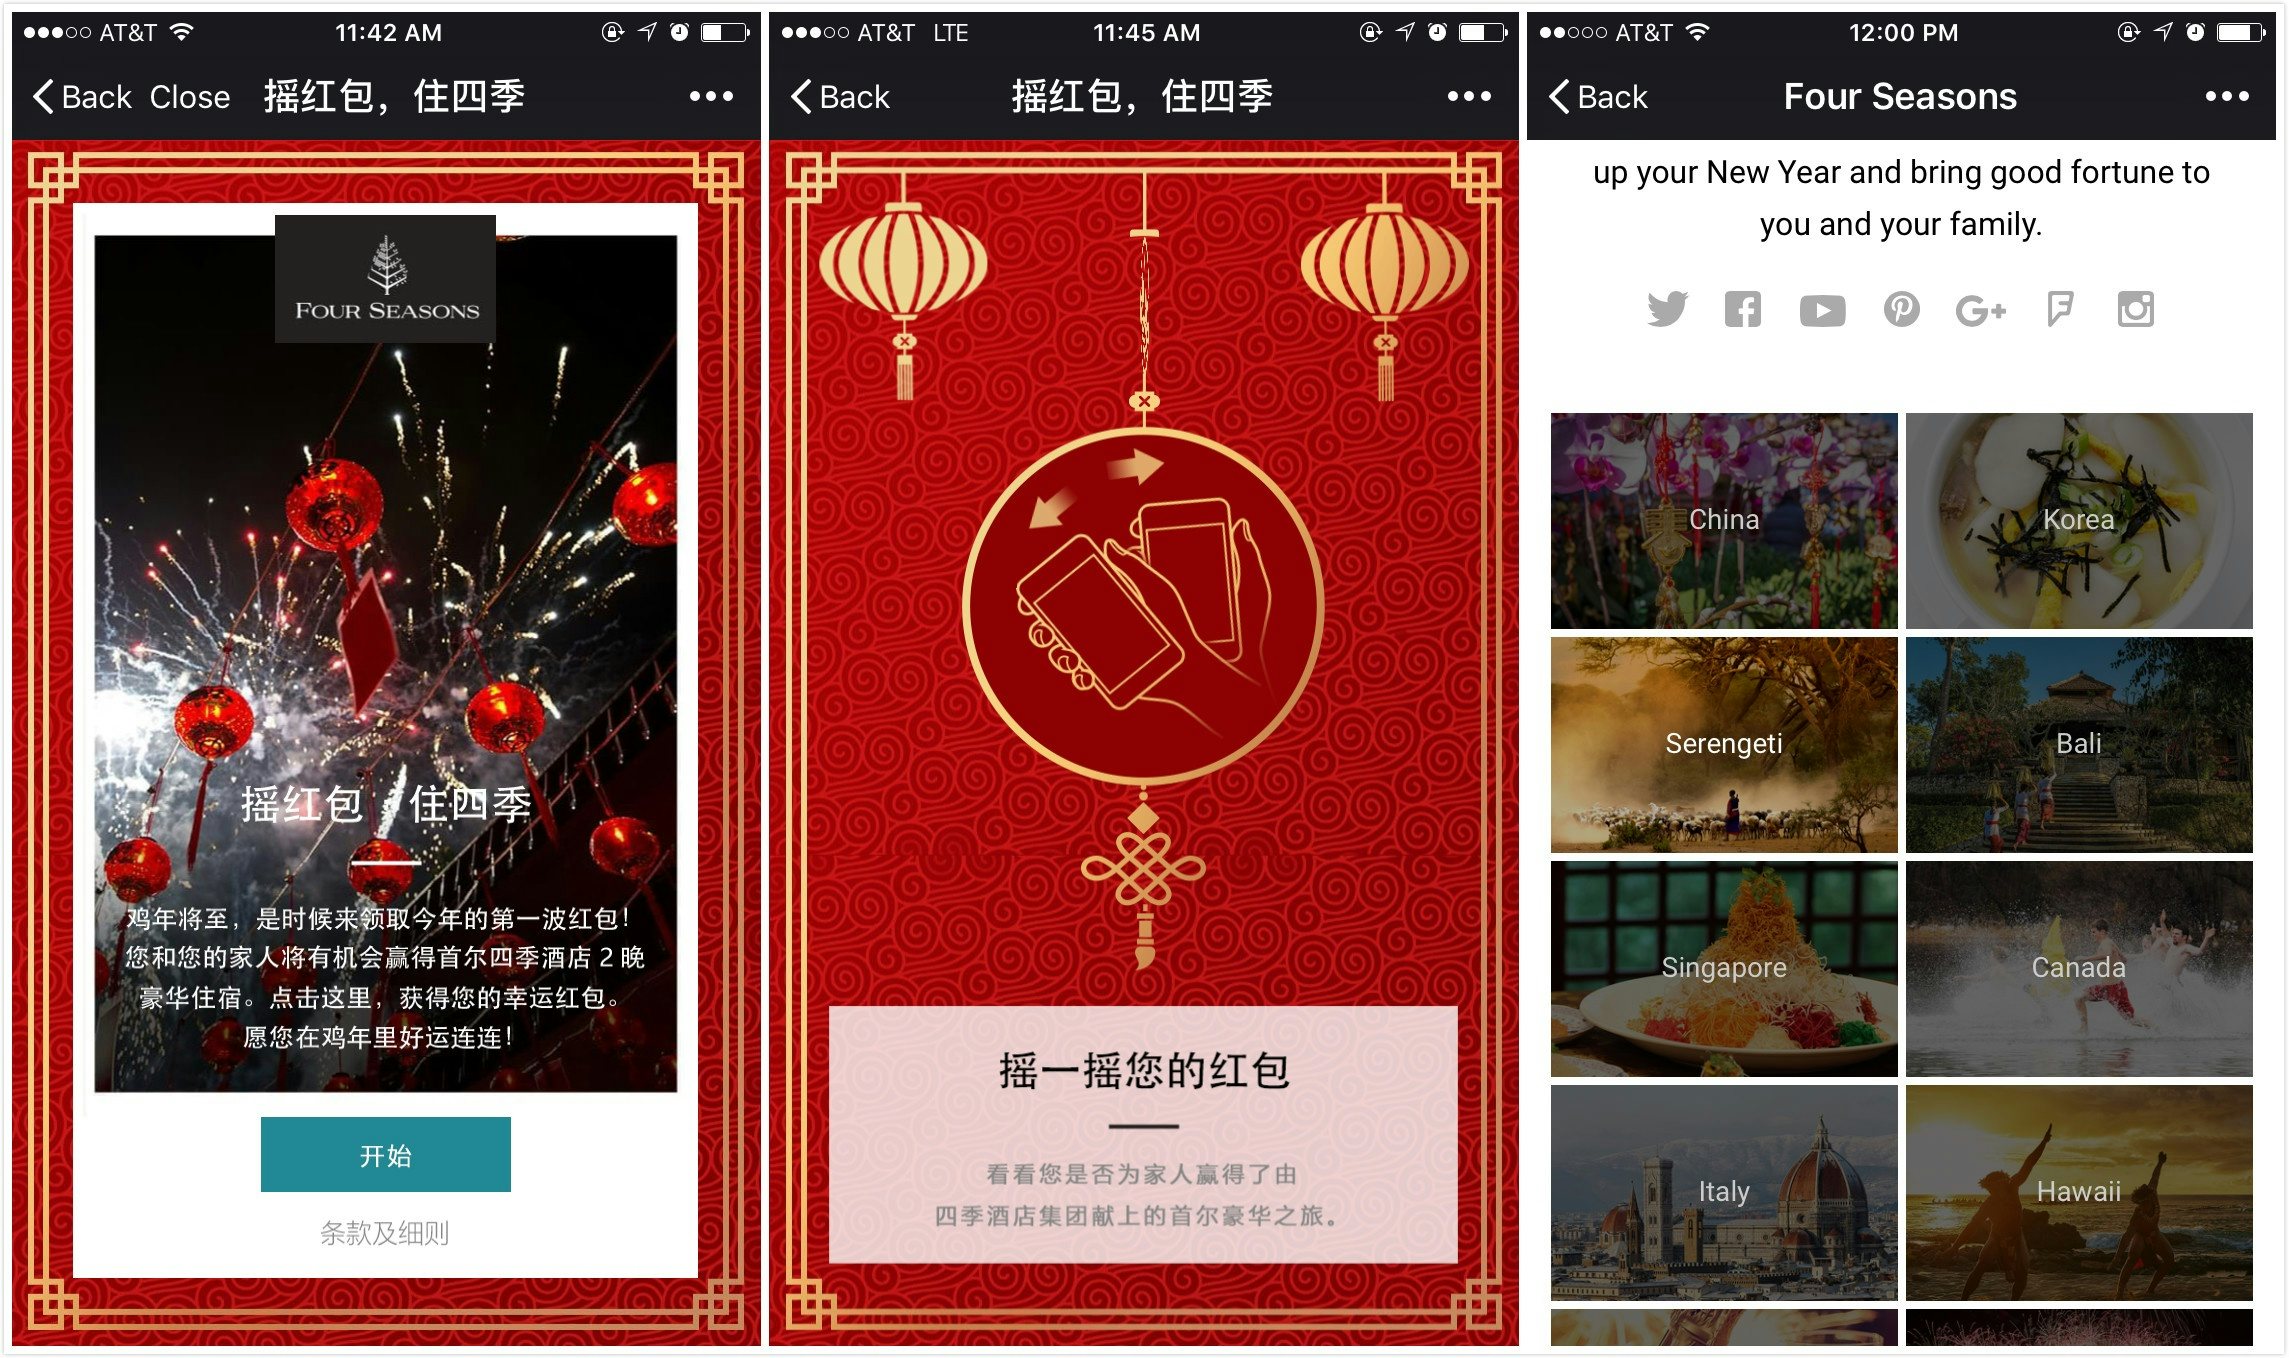 Four Seasons’ offers its WeChat followers a “Red Envelope” game.